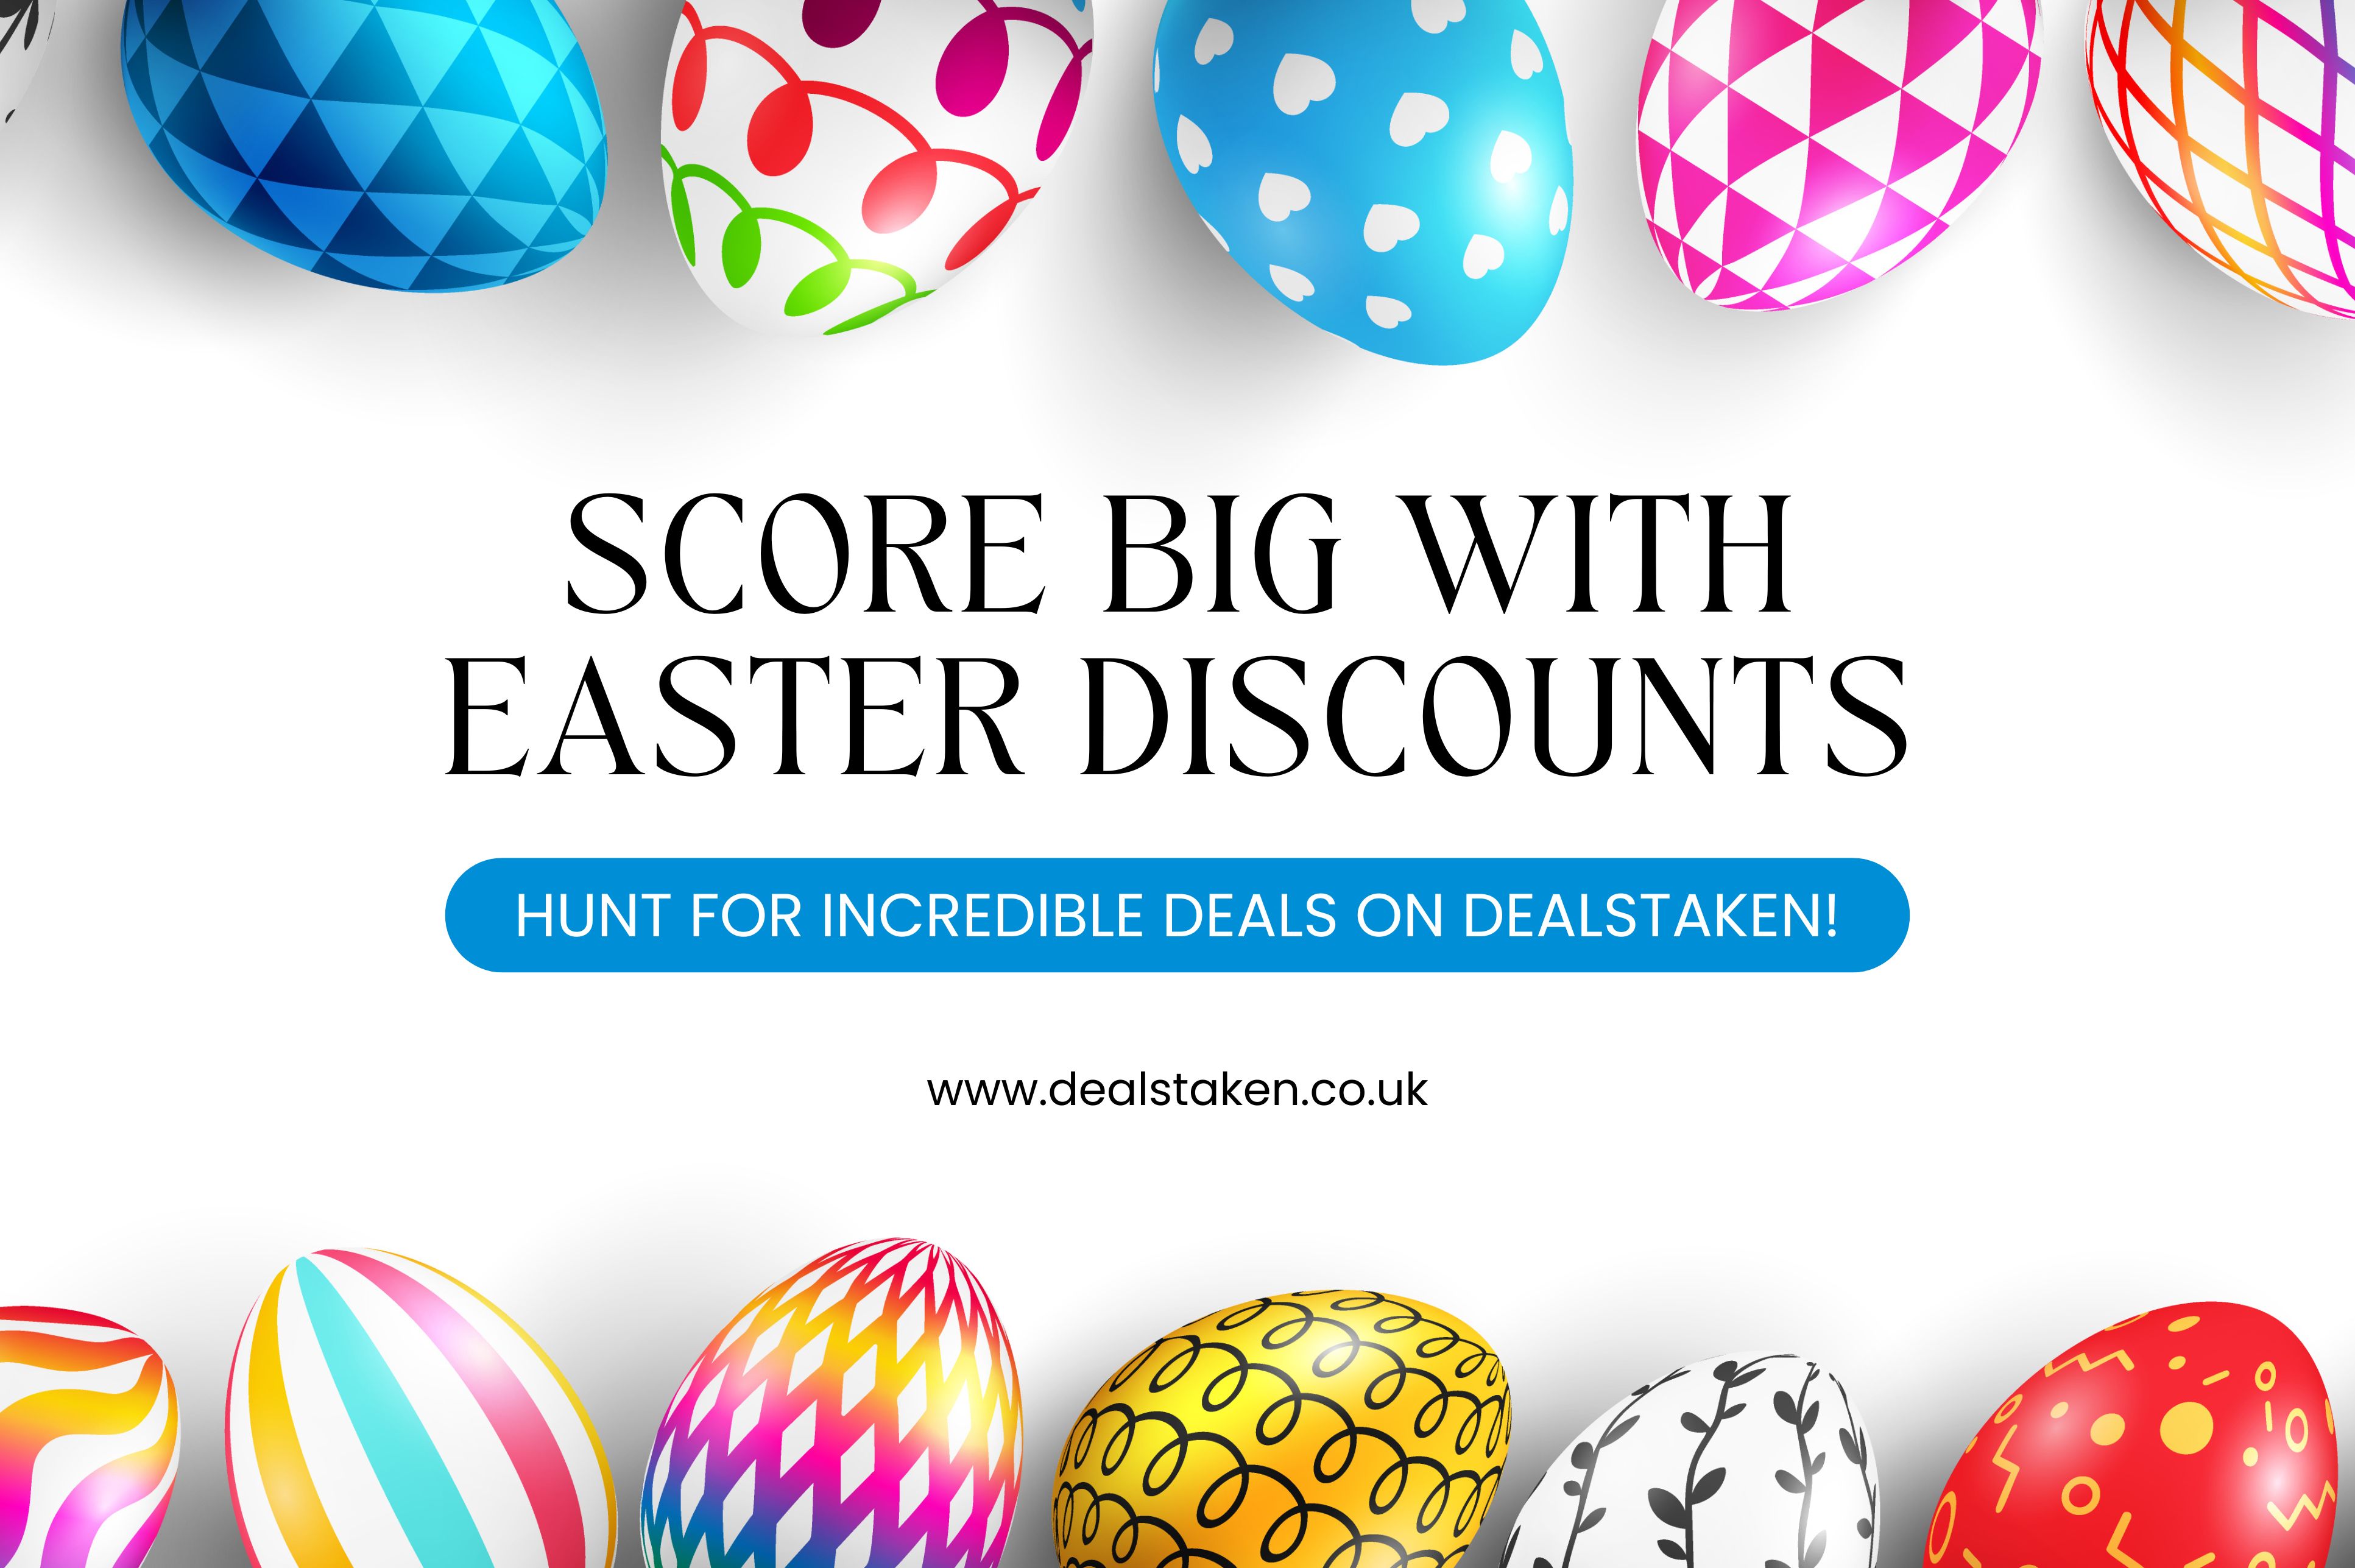 score-big-with-easter-discounts-hunt-for-incredible-deals-on-dealstaken